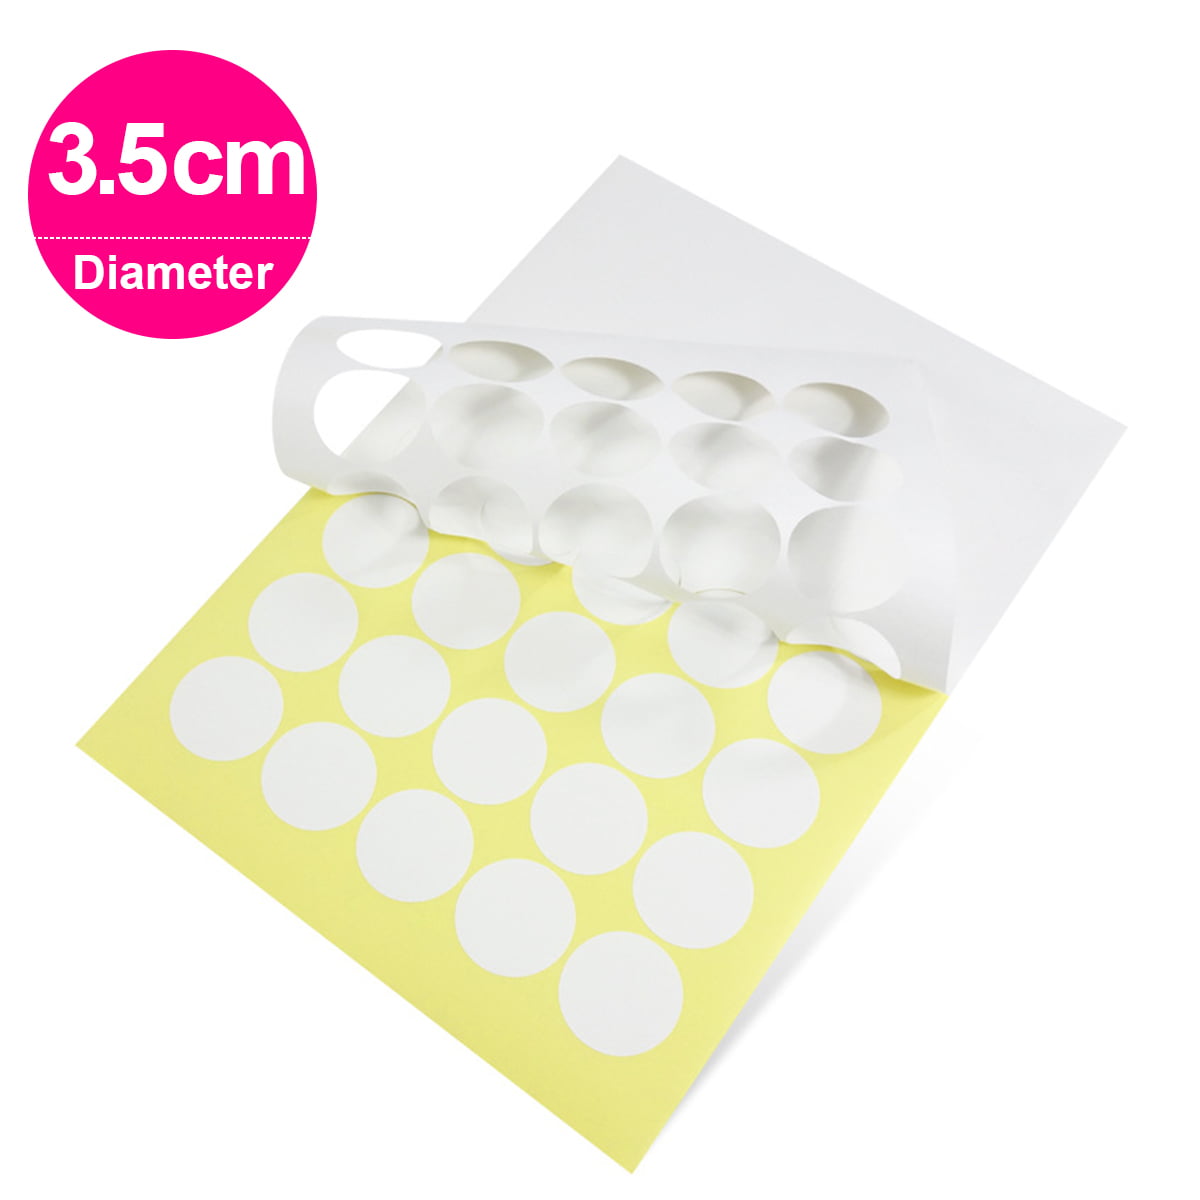 500 BLANK WHITE SELF ADHESIVE PEEL STICKY POSTAGE ADDRESS LABEL ON ROLL 51x19mm 